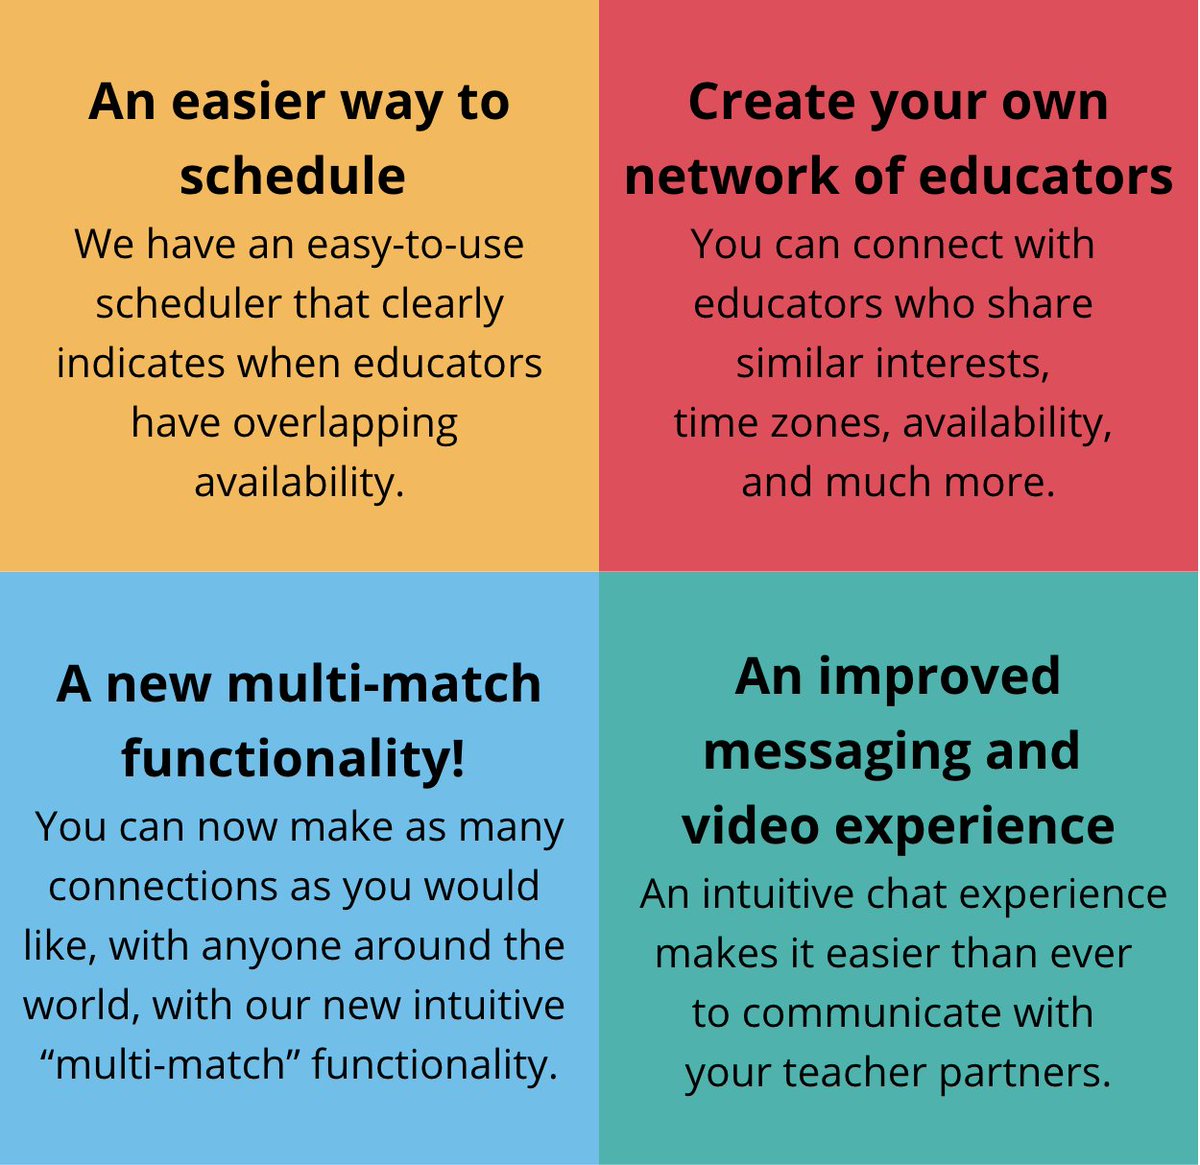 The new Empatico has launched! We have revamped Empatico to be community-driven, making it even easier for educators to connect over a shared mission of fostering an empathic future generation. Create your free account at empatico.org 🌍💛 #edtech #teachersoftwitter